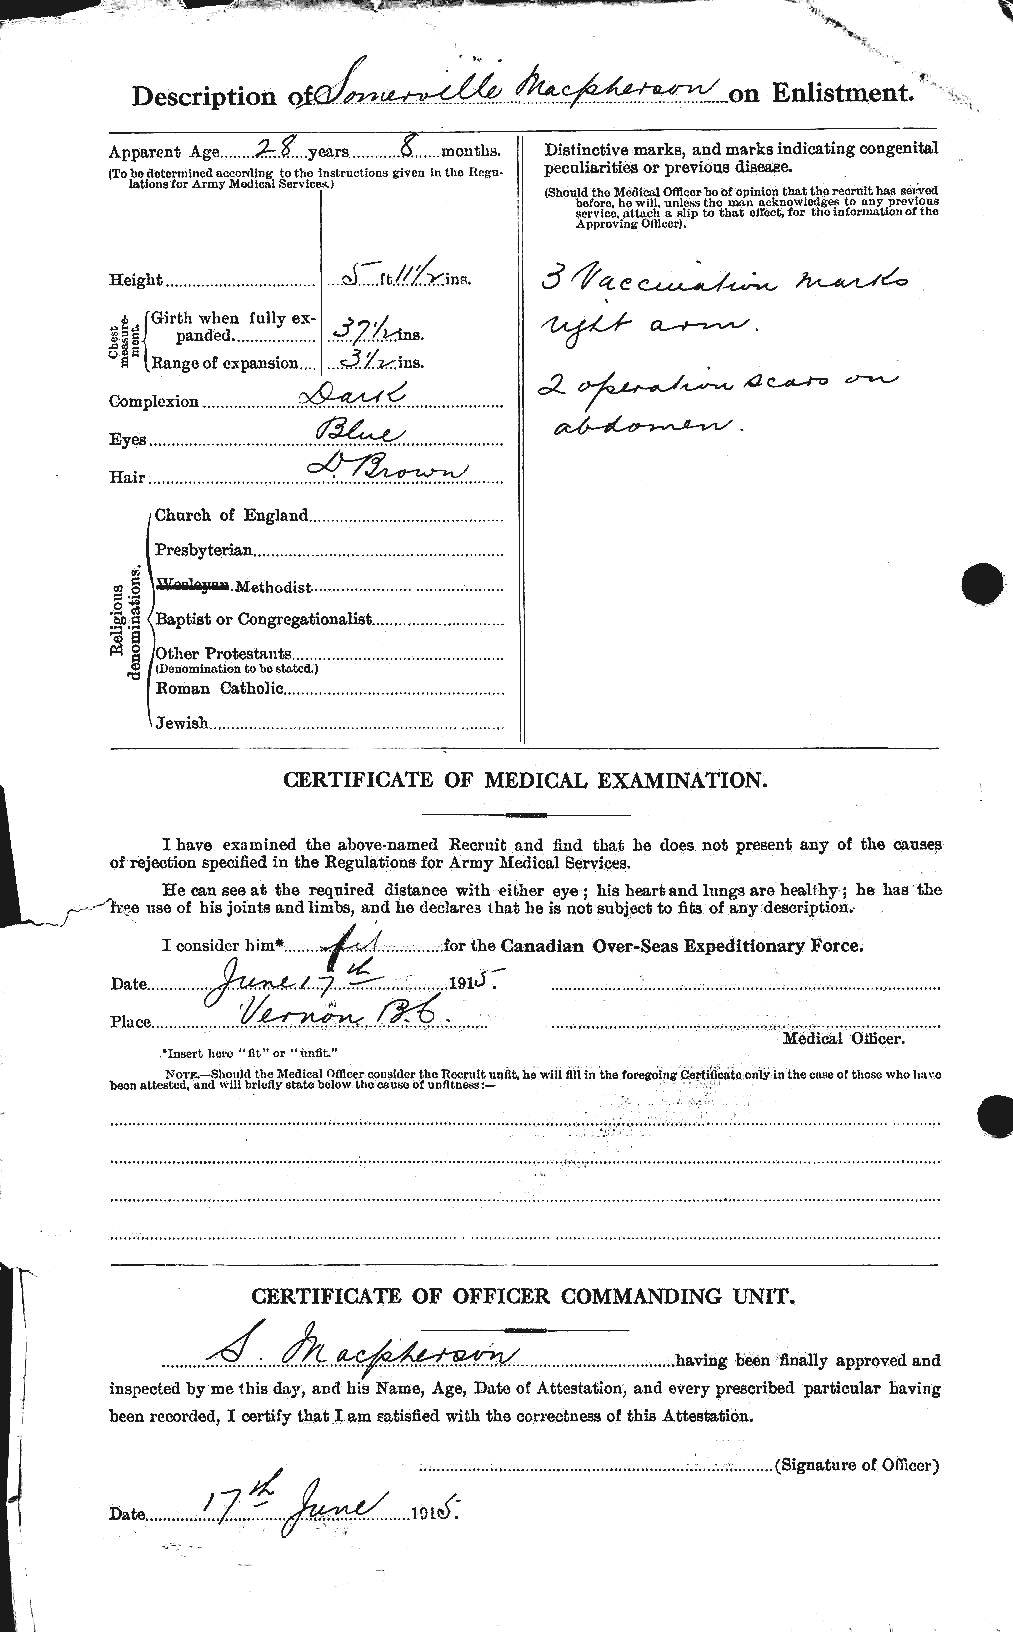 Personnel Records of the First World War - CEF 543295b